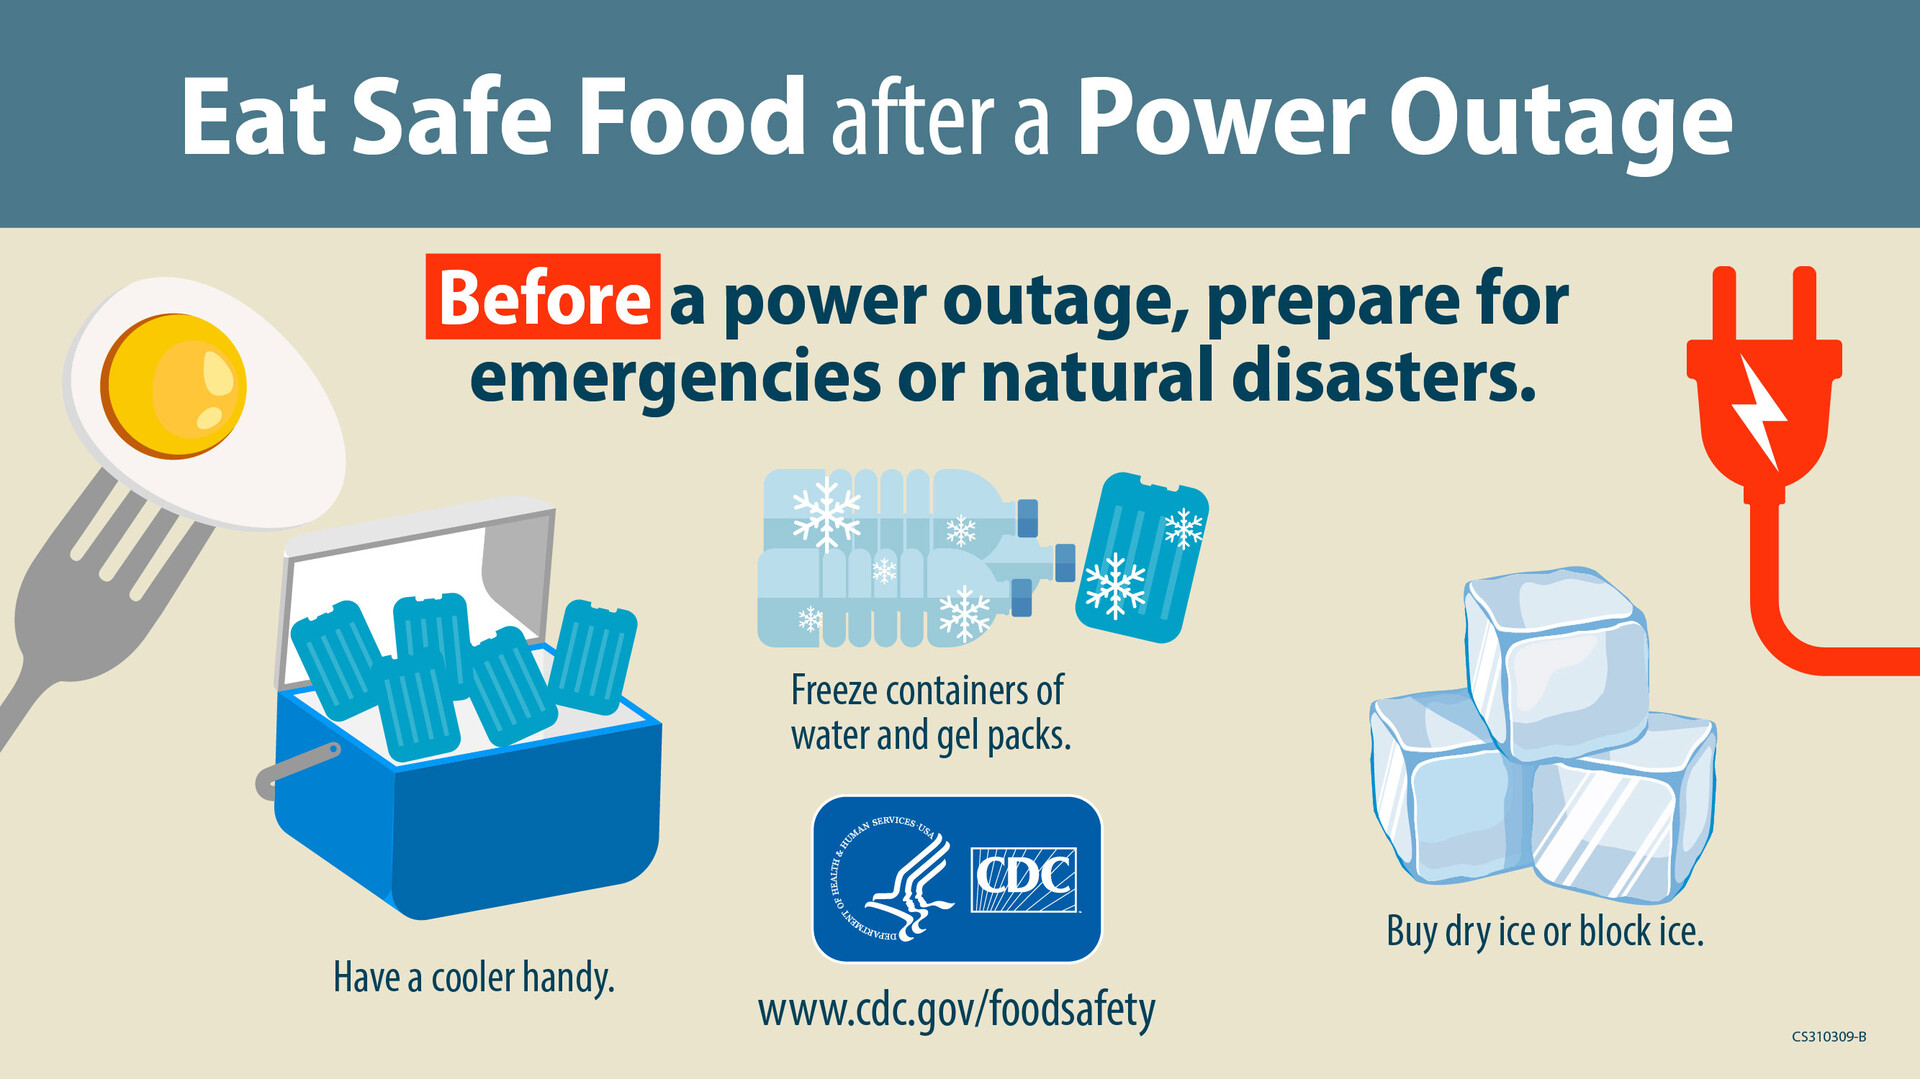 Food Safety in a Power Outage